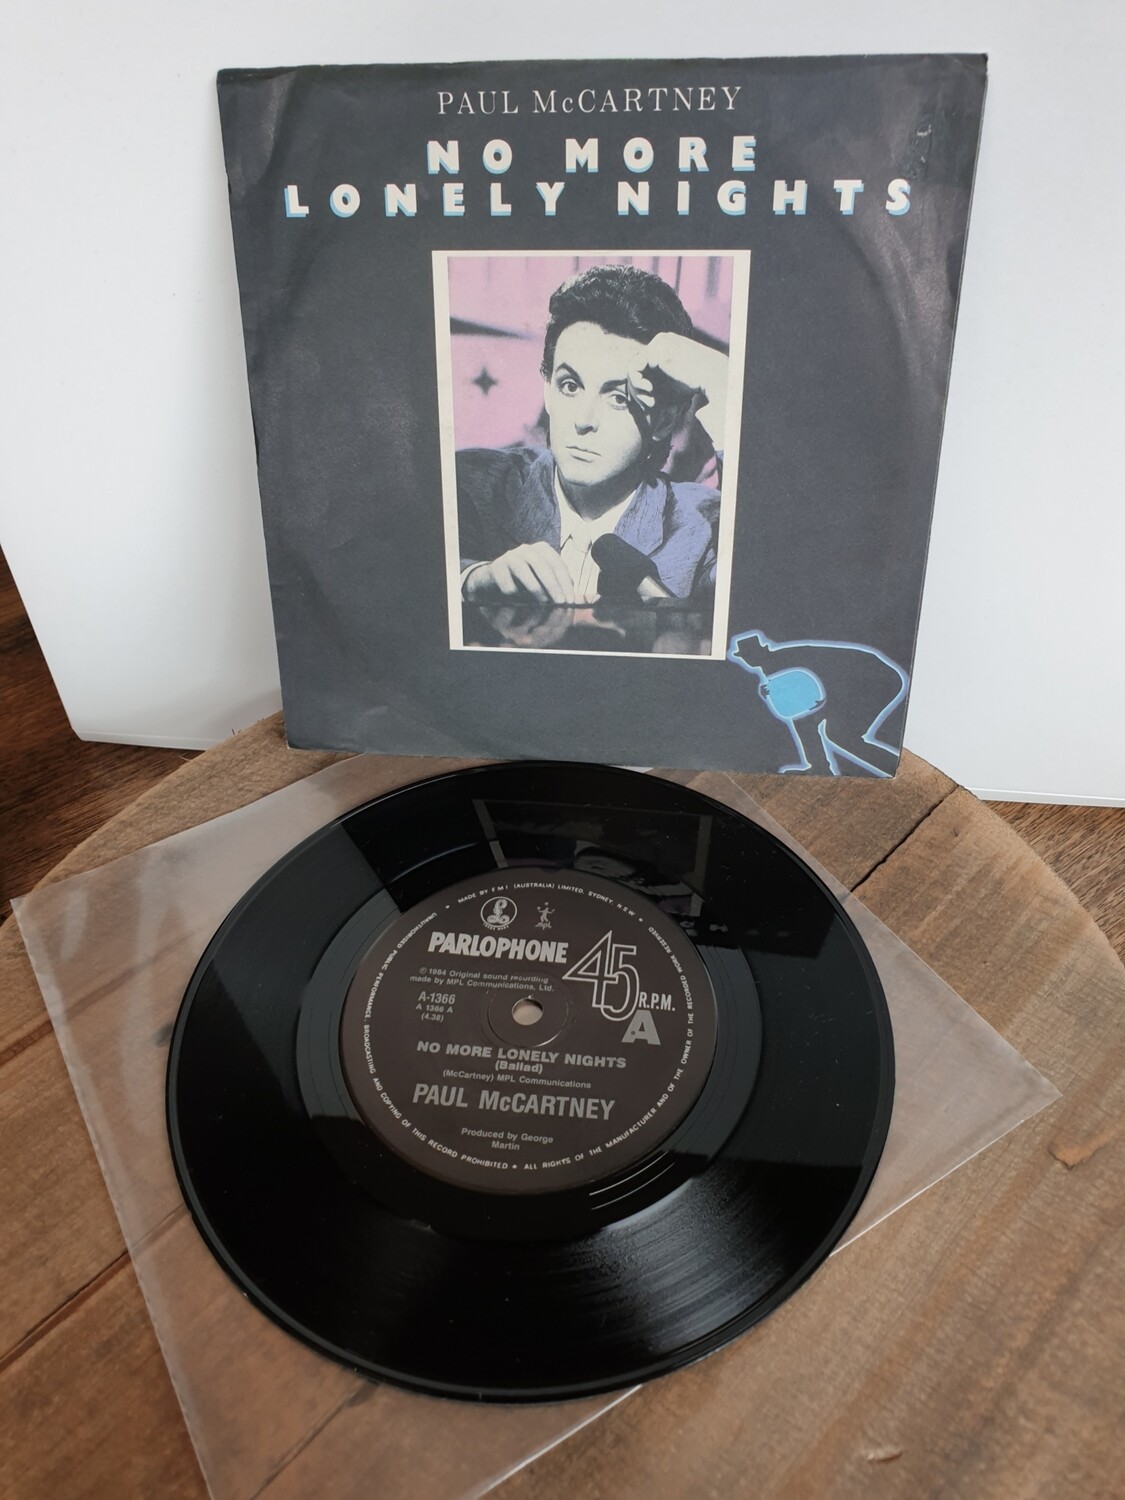 PAUL McCARTNEY NO MORE LONELY NIGHTS 7"SINGLE